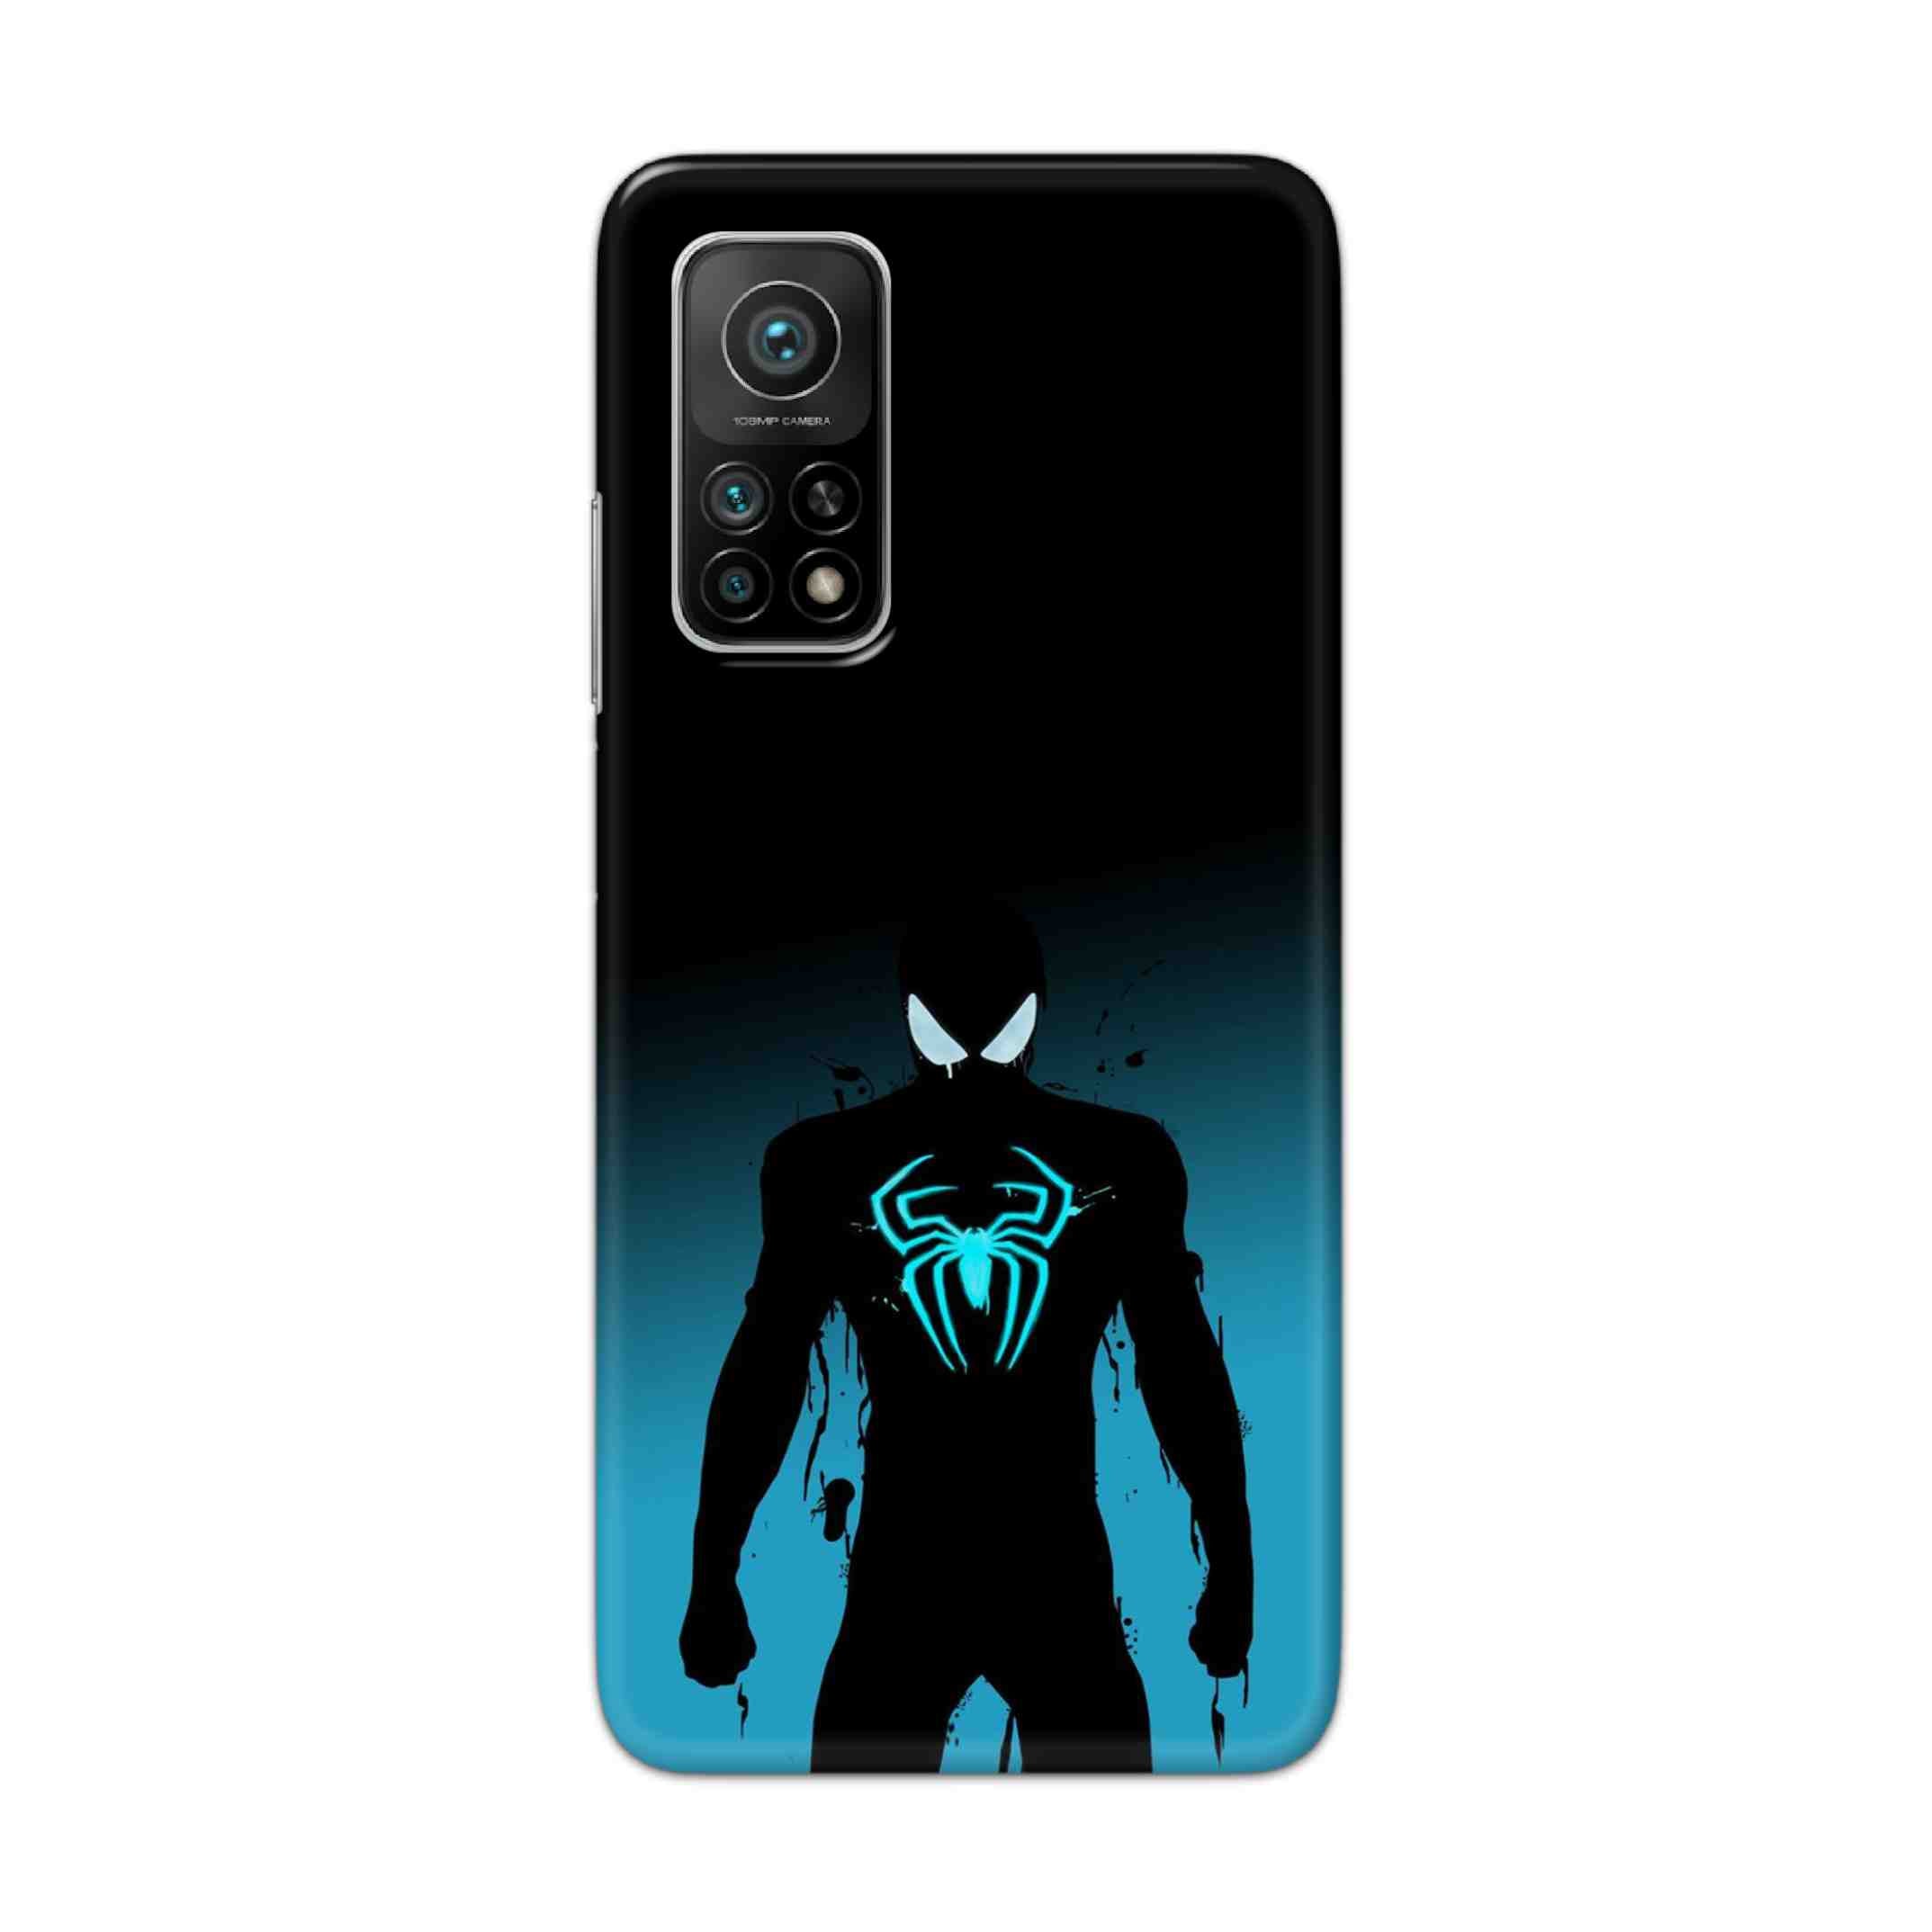 Buy Neon Spiderman Hard Back Mobile Phone Case Cover For Xiaomi Mi 10T 5G Online